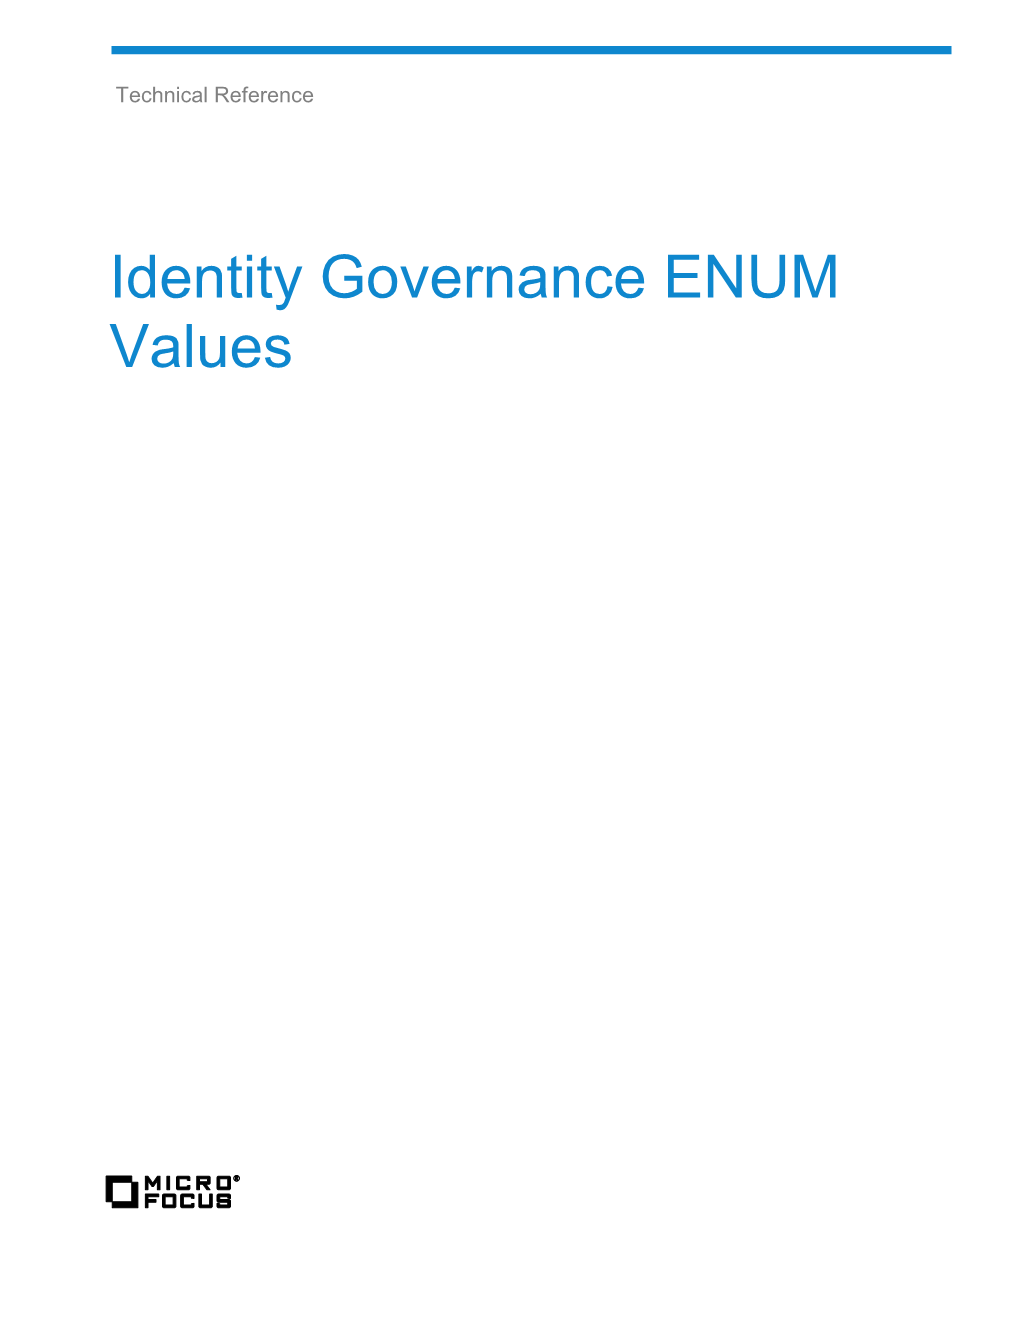 Identity Governance ENUM Values Technical Reference